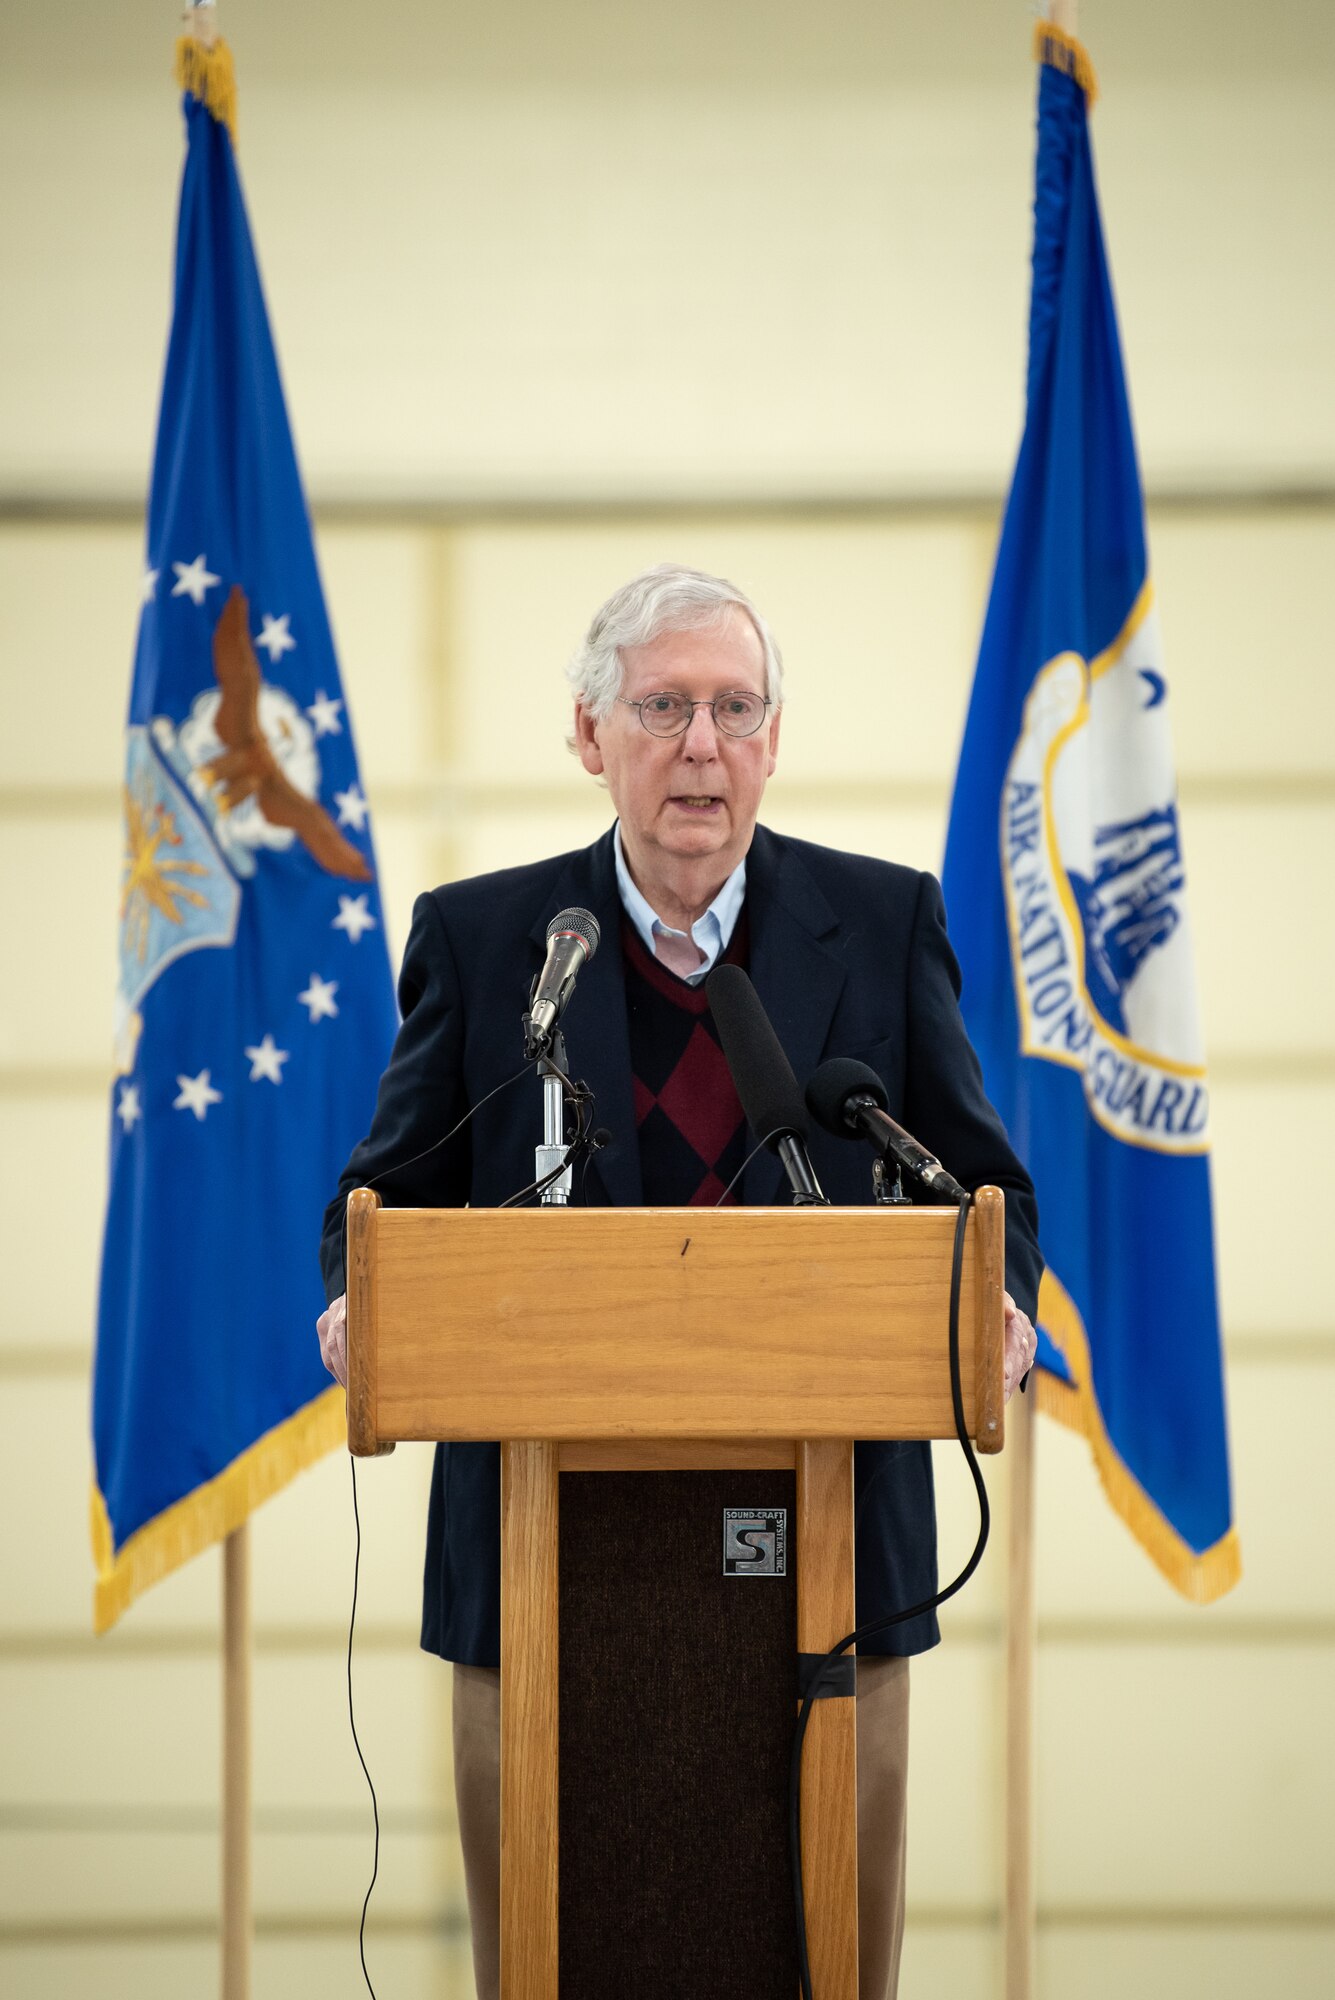 U.S. Sen. Mitch McConnell speaks to audience members during a ceremony at the Kentucky Air National Guard Base in Louisville, Ky., Nov. 6, 2021, to welcome the arrival of two new C-130J Super Hercules aircraft. The state-of-the-art transports are among eight that the 123rd Airlift Wing will receive over the next 11 months to replace eight aging C-130 H-model aircraft, which entered service in 1992 and have seen duty all over the world. (U.S. Air National Guard photo by Dale Greer)